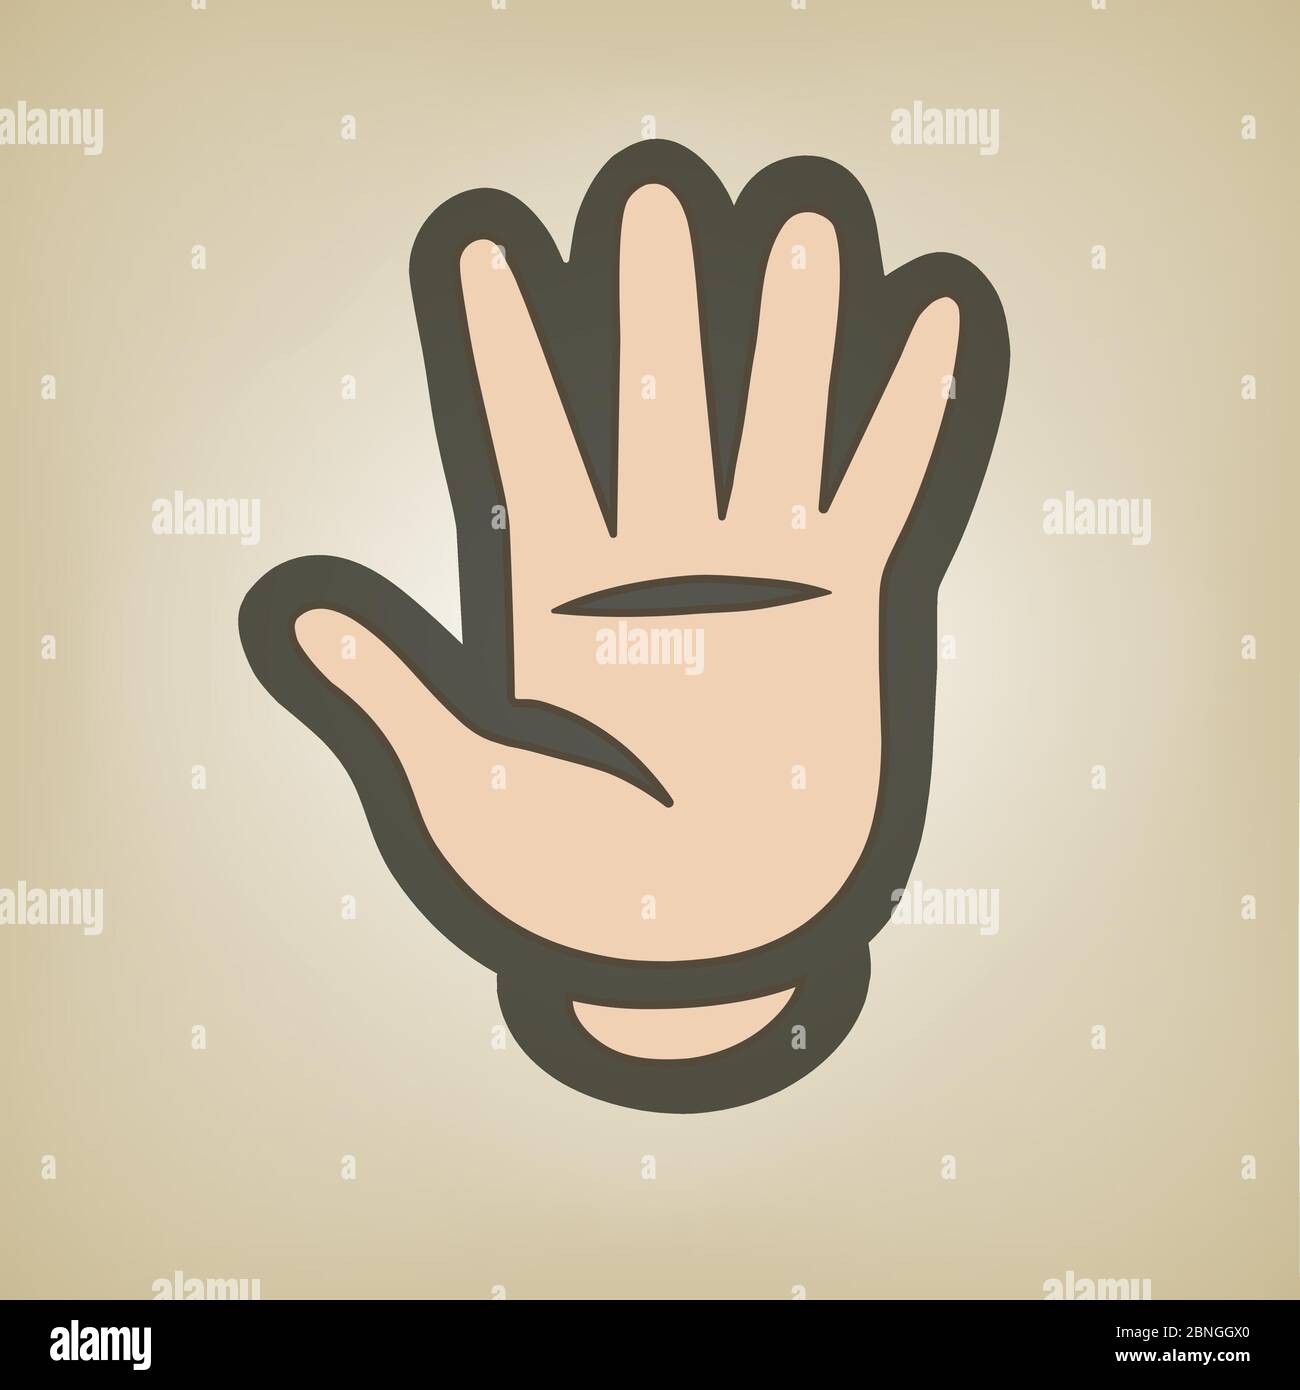 one open hand in cartoon style Stock Photo